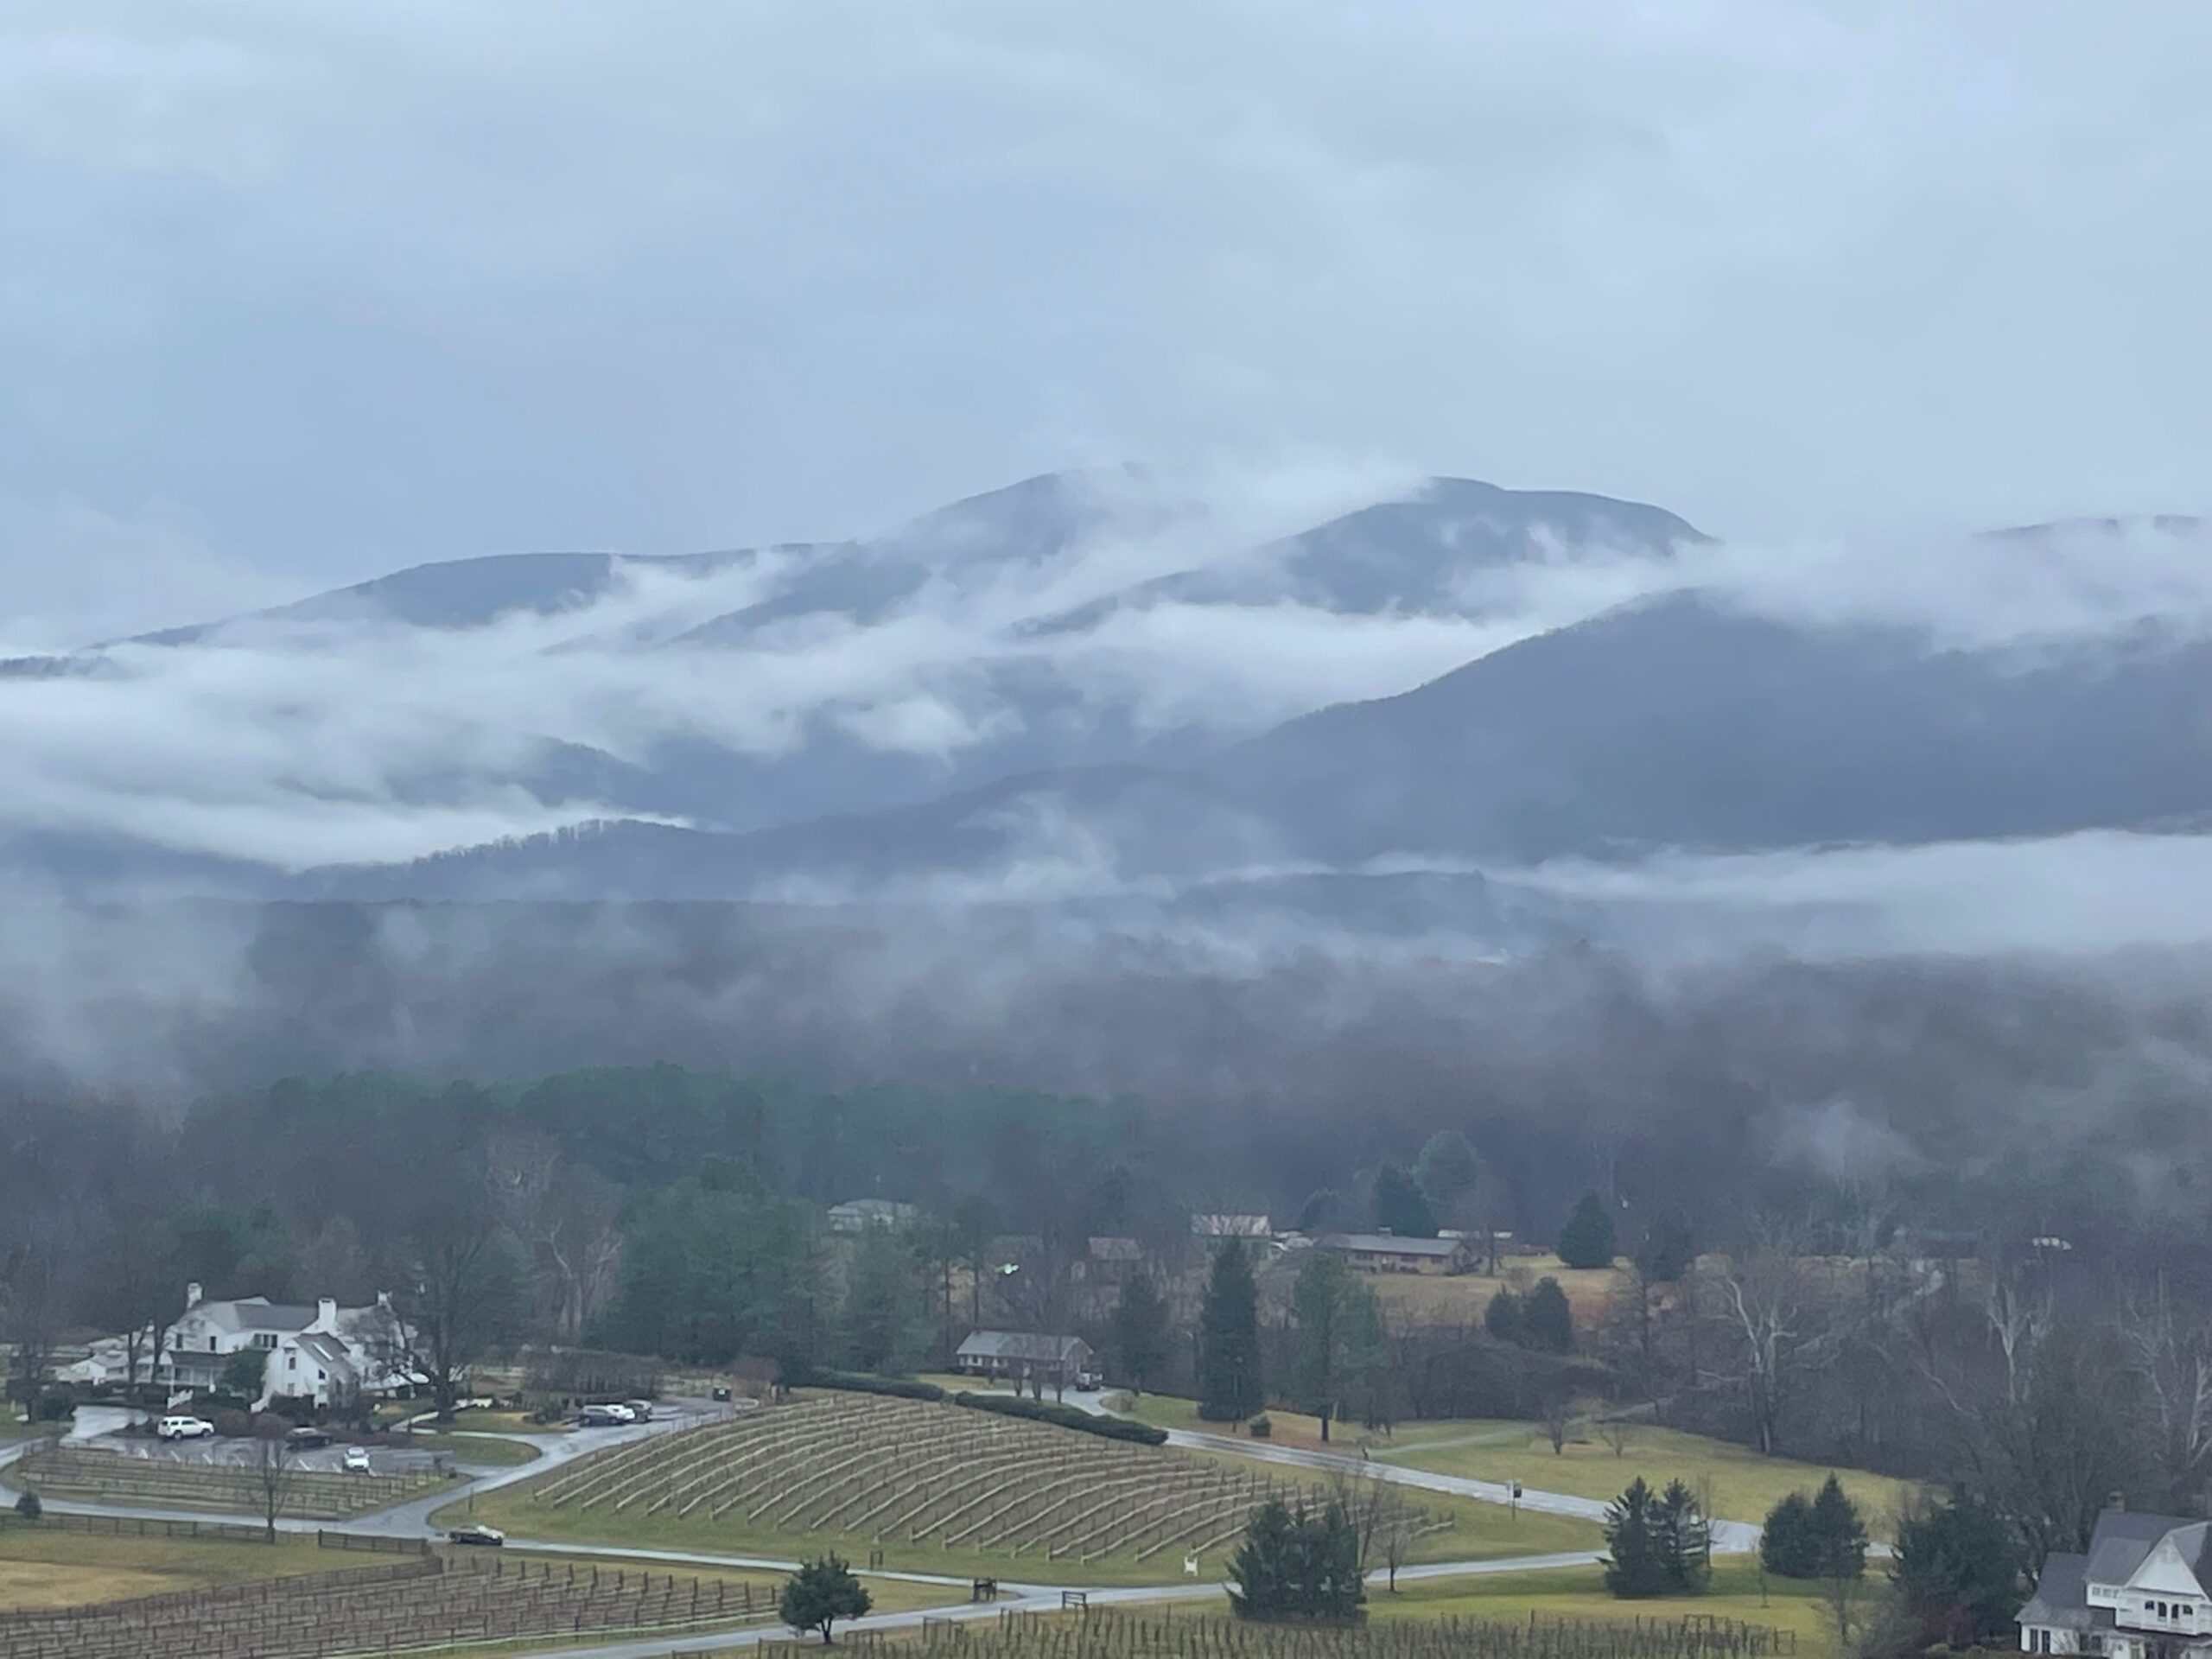 Winter landscape of the farmhouse at Veritas from a high viewpoint. Clouds cover mountains in the background.